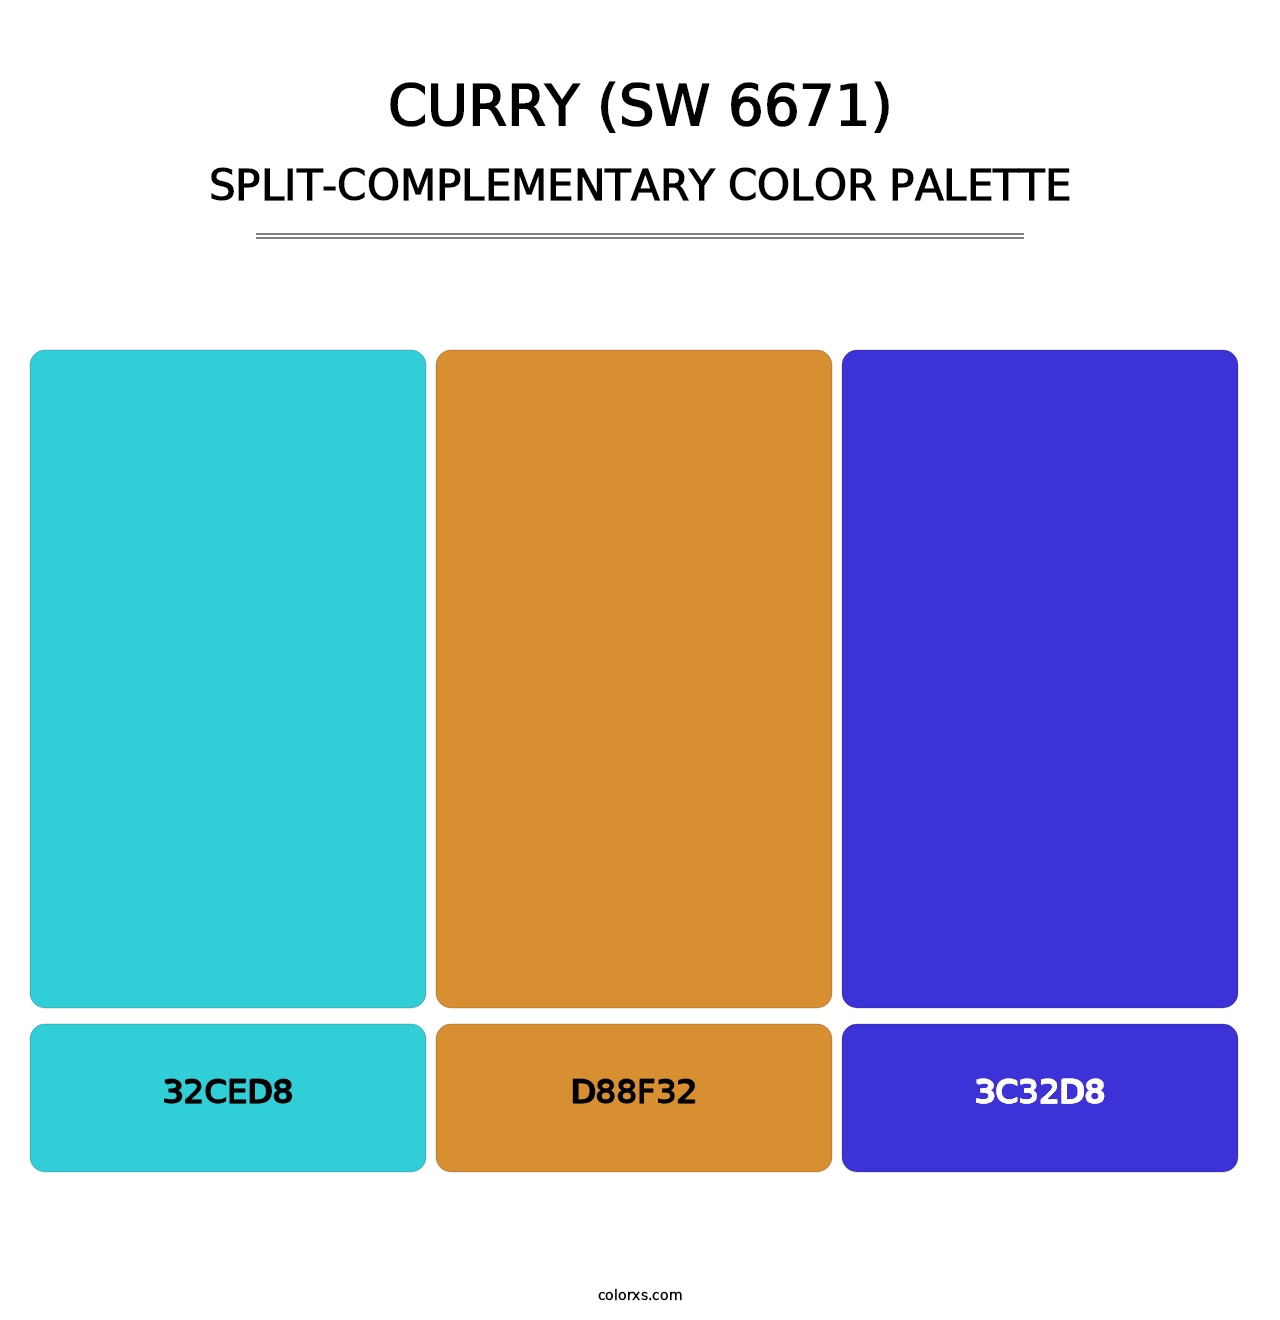 Curry (SW 6671) - Split-Complementary Color Palette